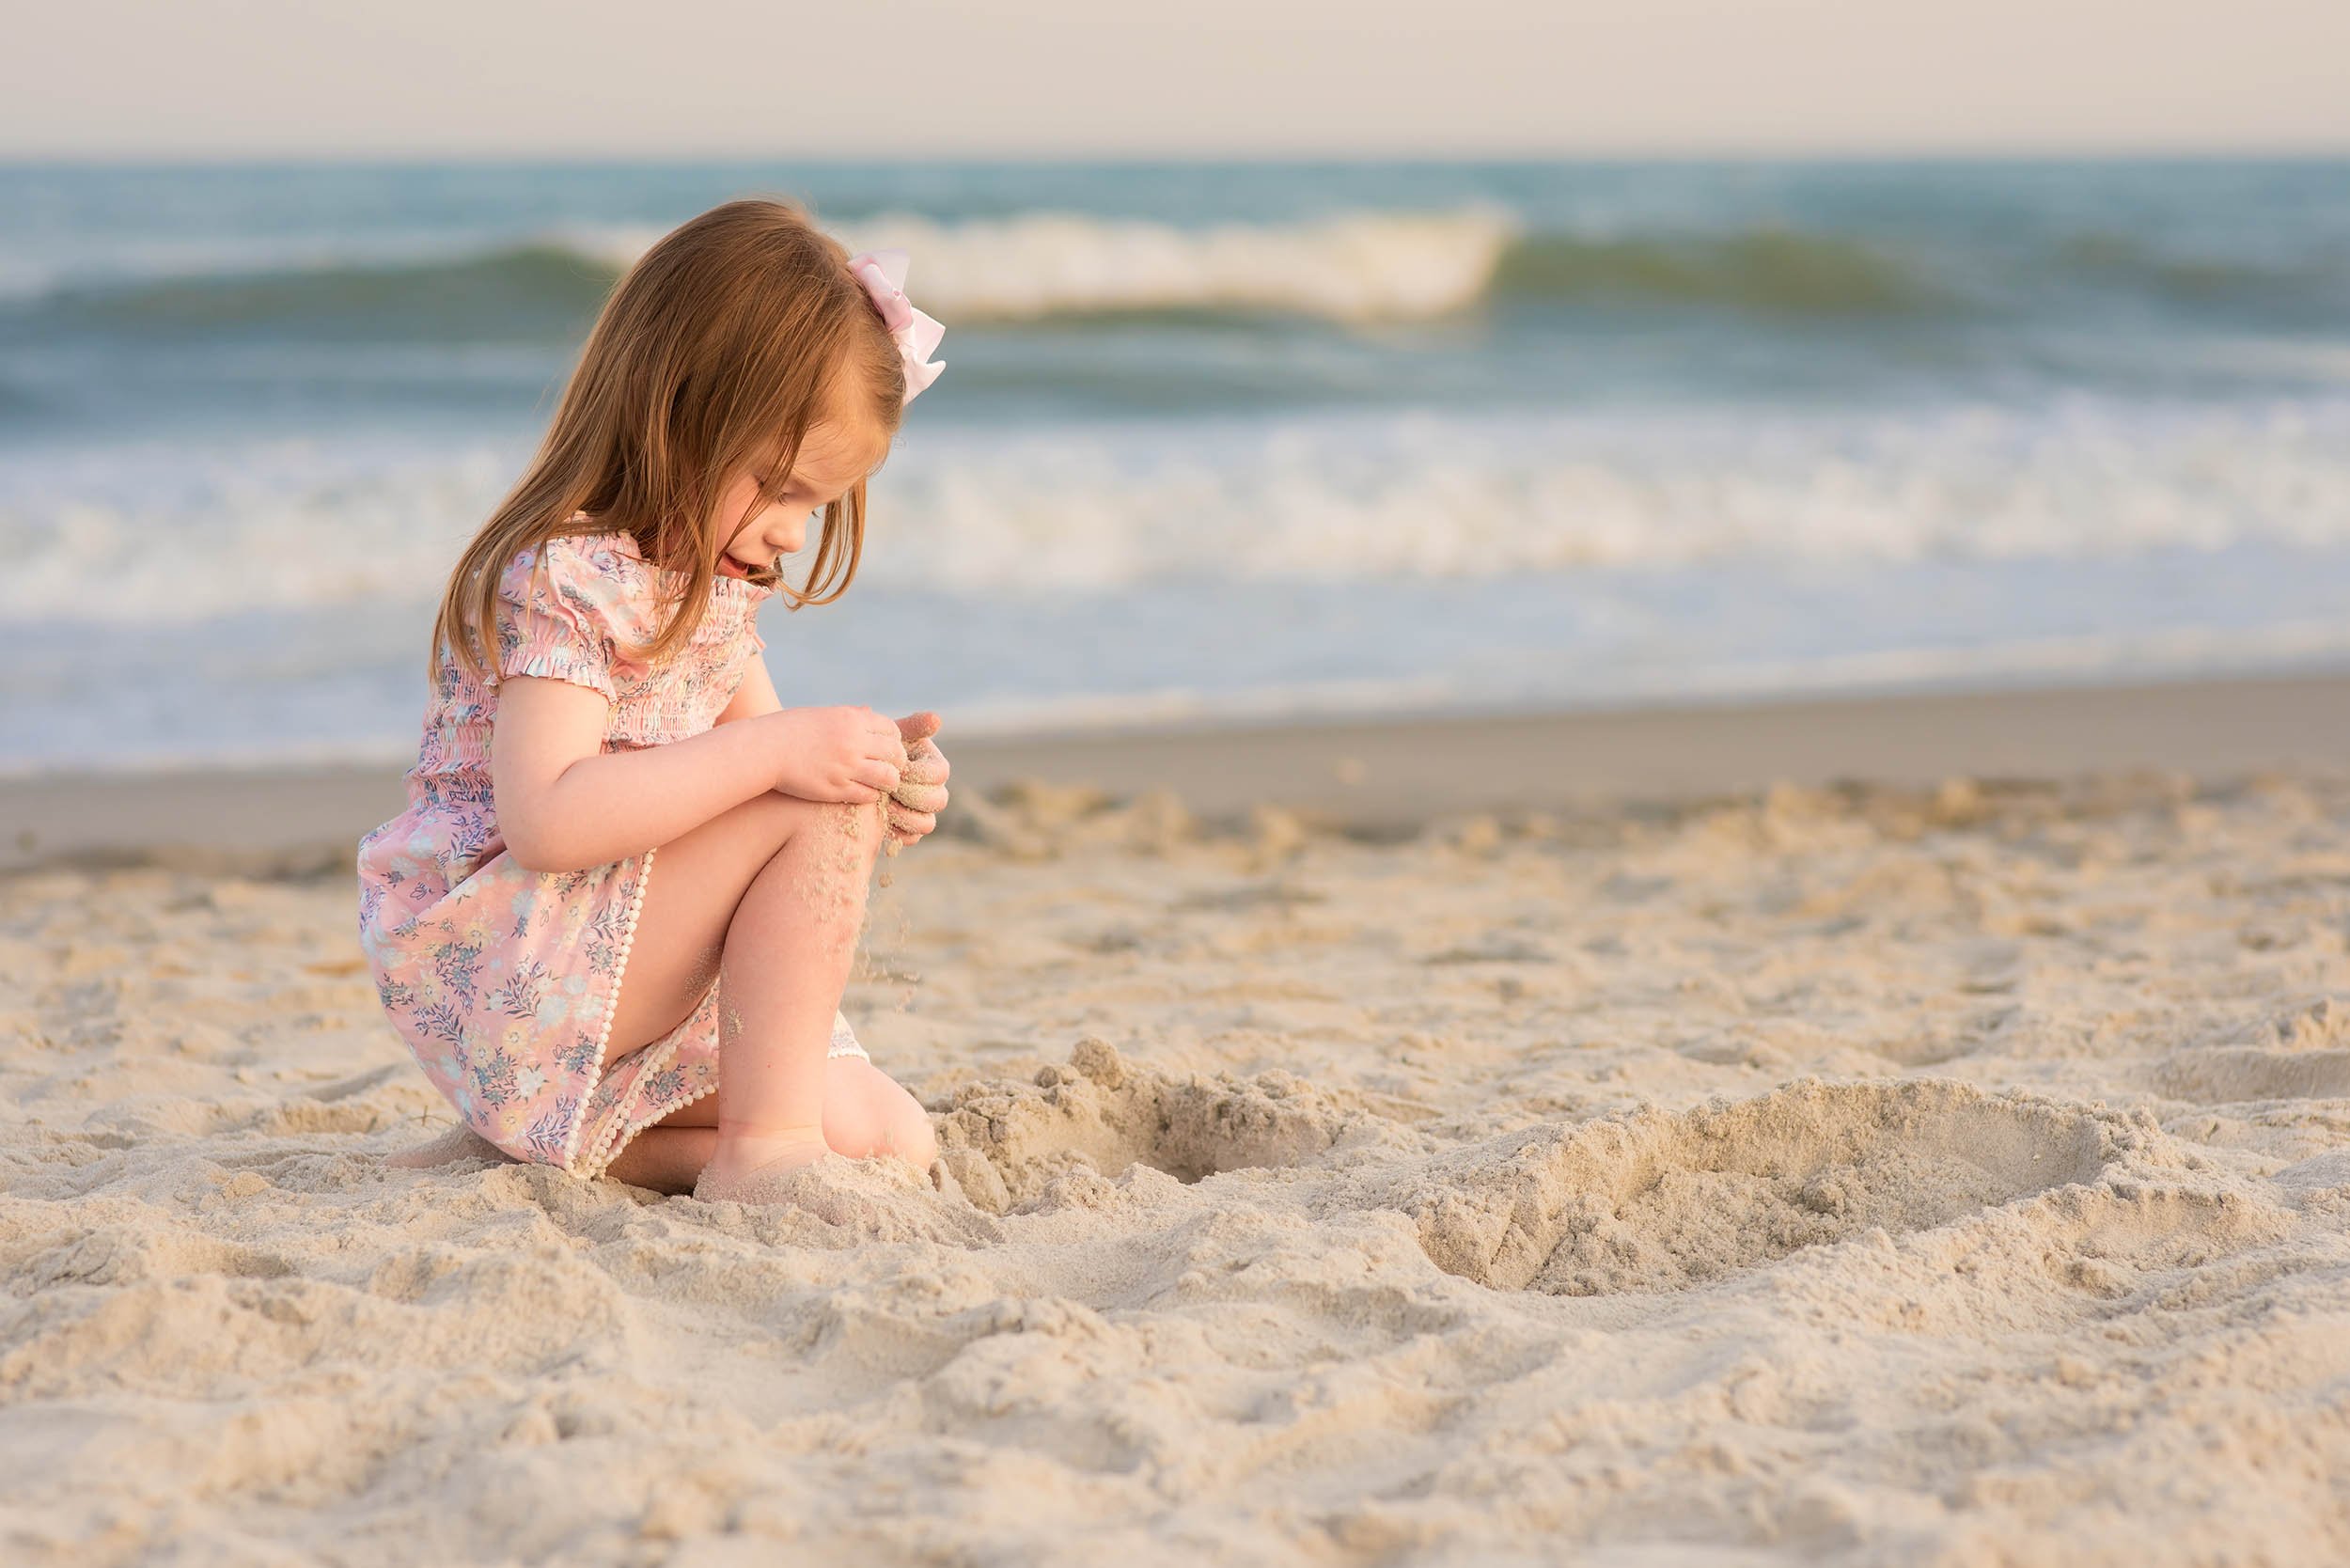 Playing in the sand.